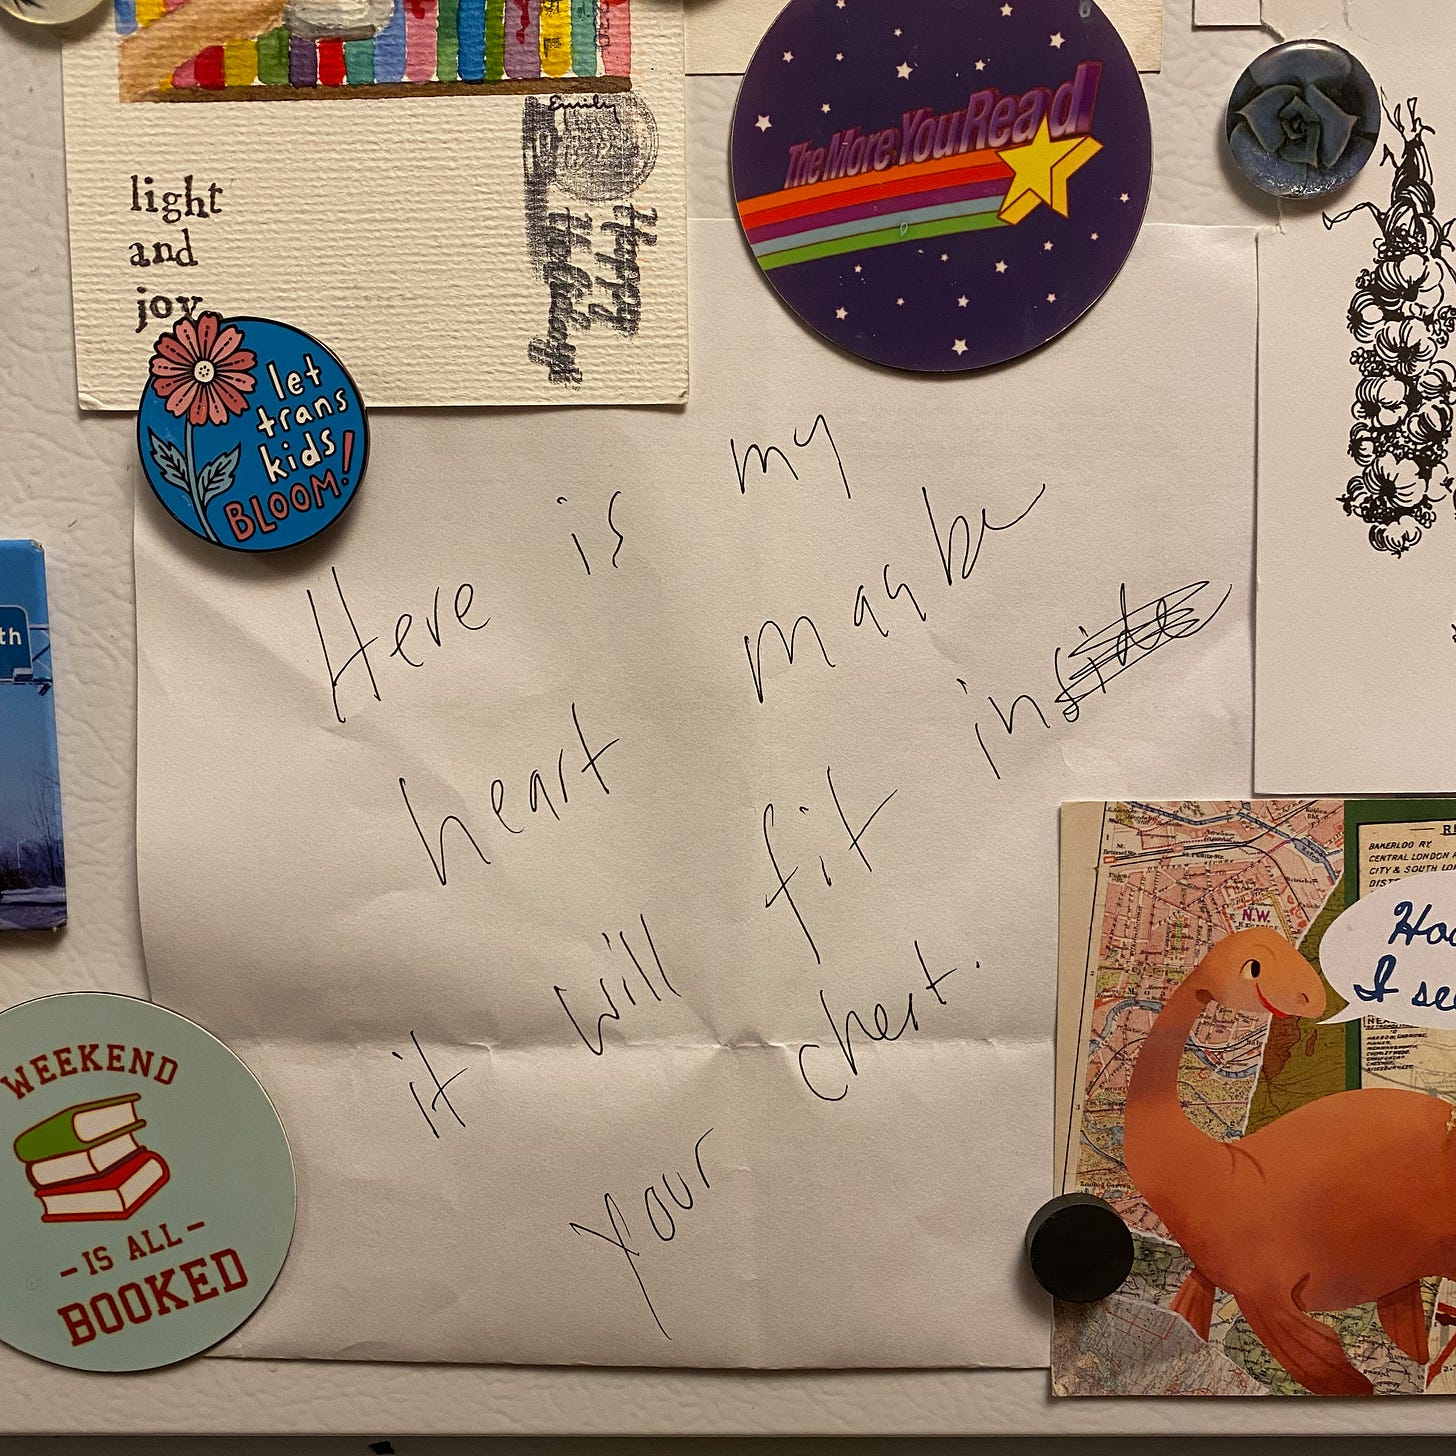 A handwritten page on my fridge, surrounded by colorful magnets. The quote reads: “Here is my heart, maybe it will fit in your chest.”